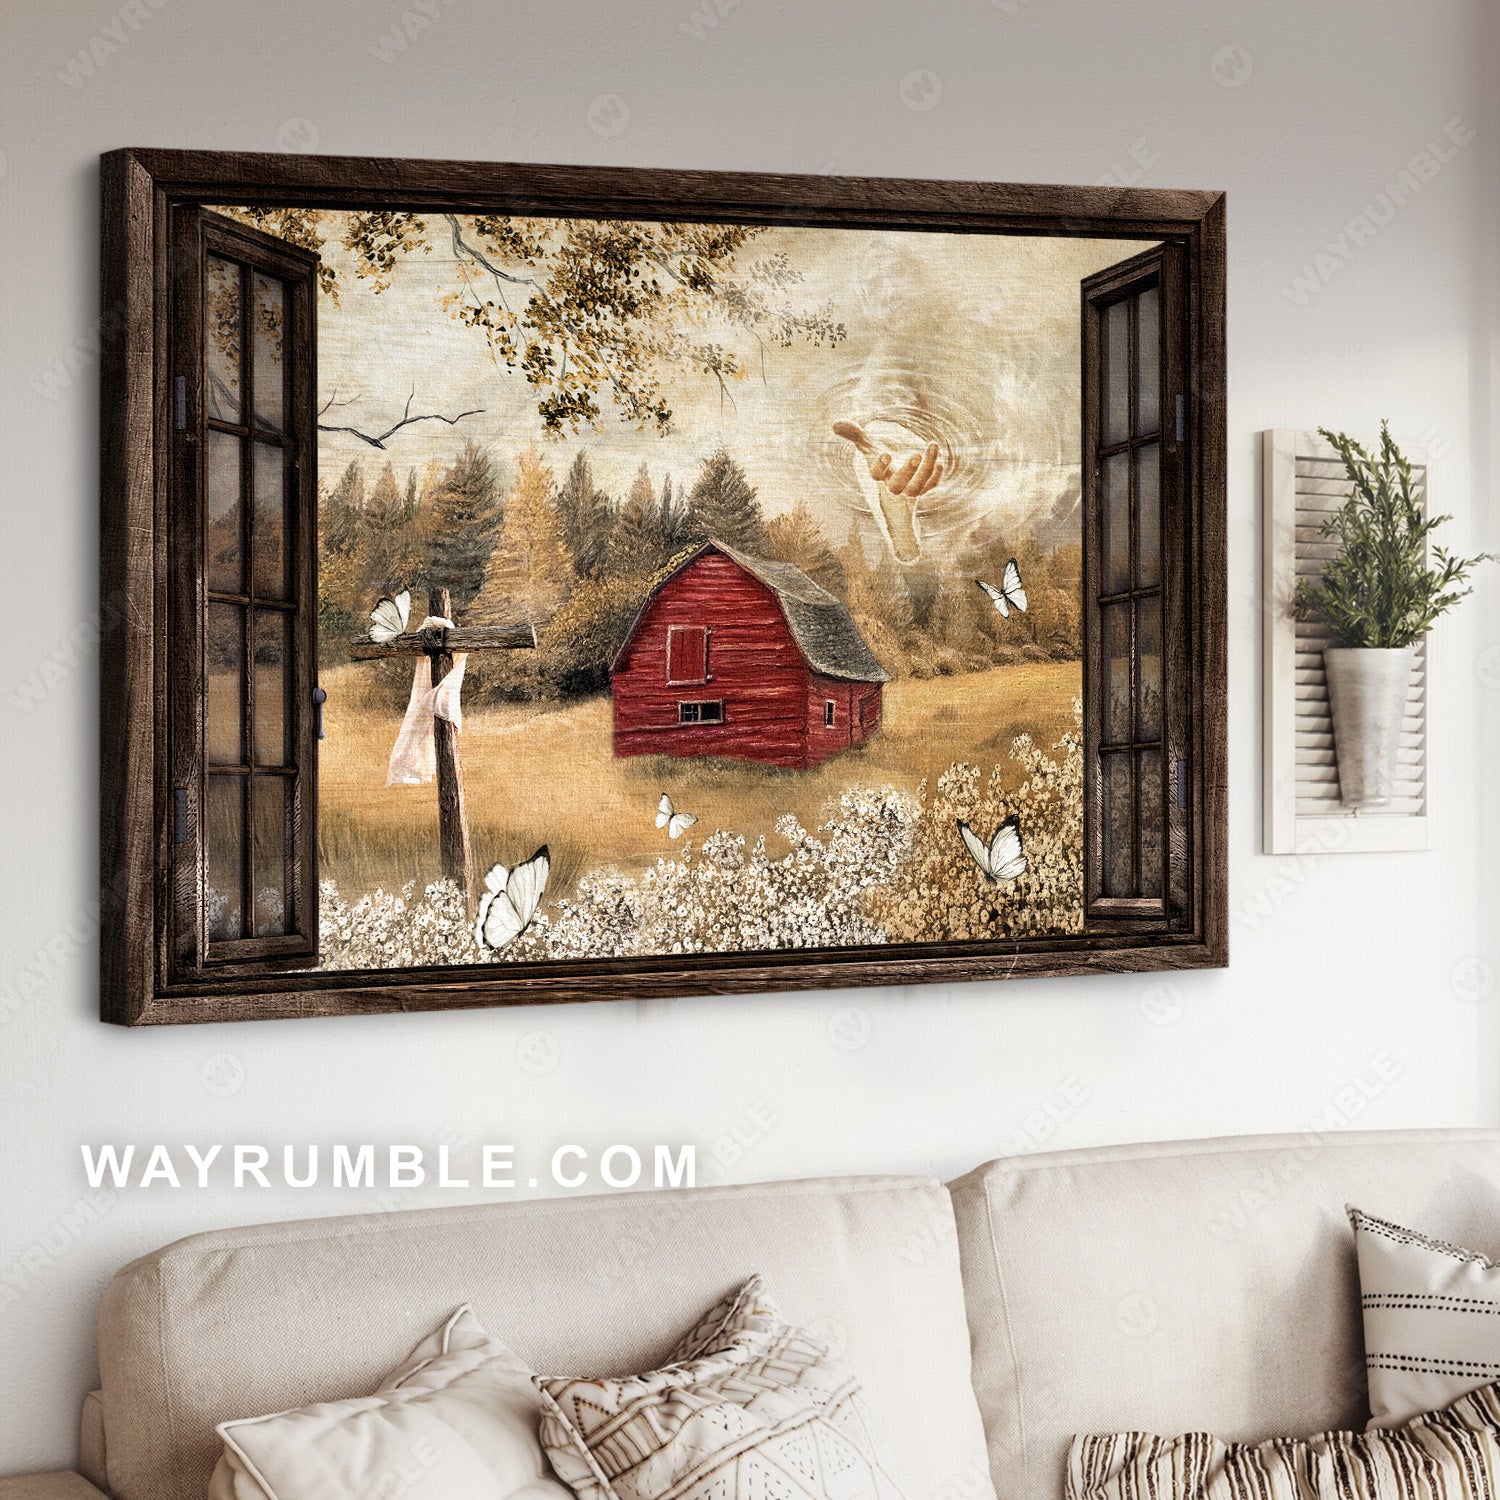 Countryside landscape, Red barn house, Jesus's hand, Peaceful time - Jesus Landscape Canvas Prints, Christian Wall Art